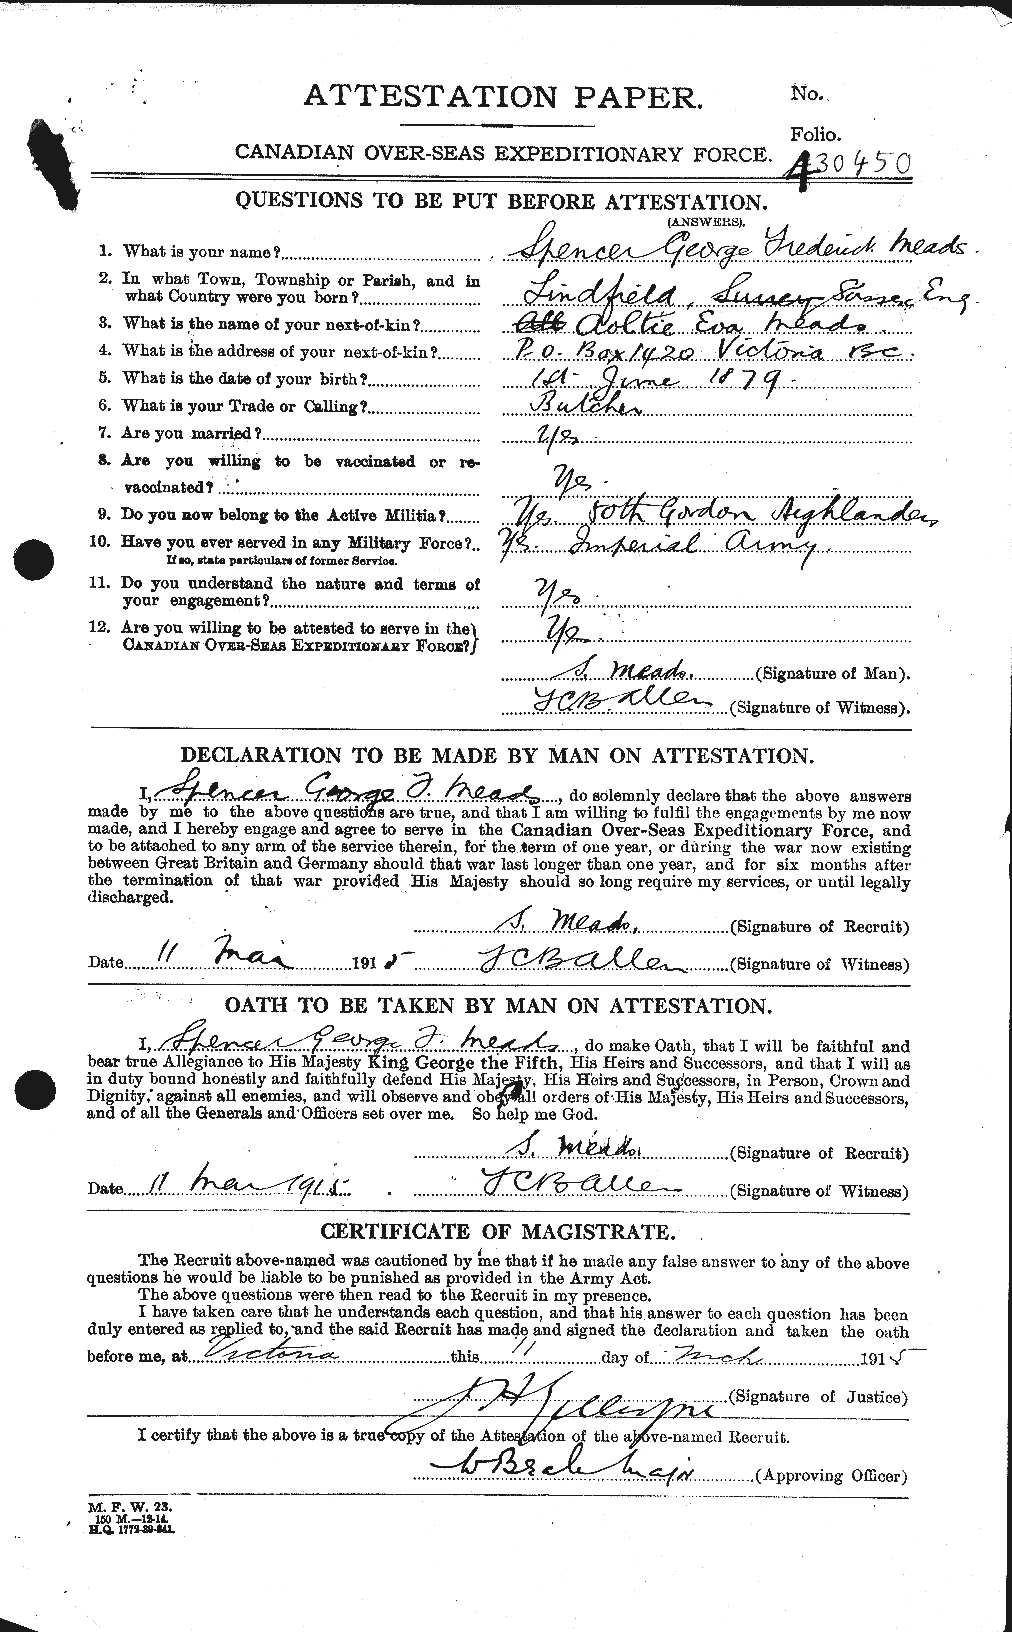 Personnel Records of the First World War - CEF 489533a